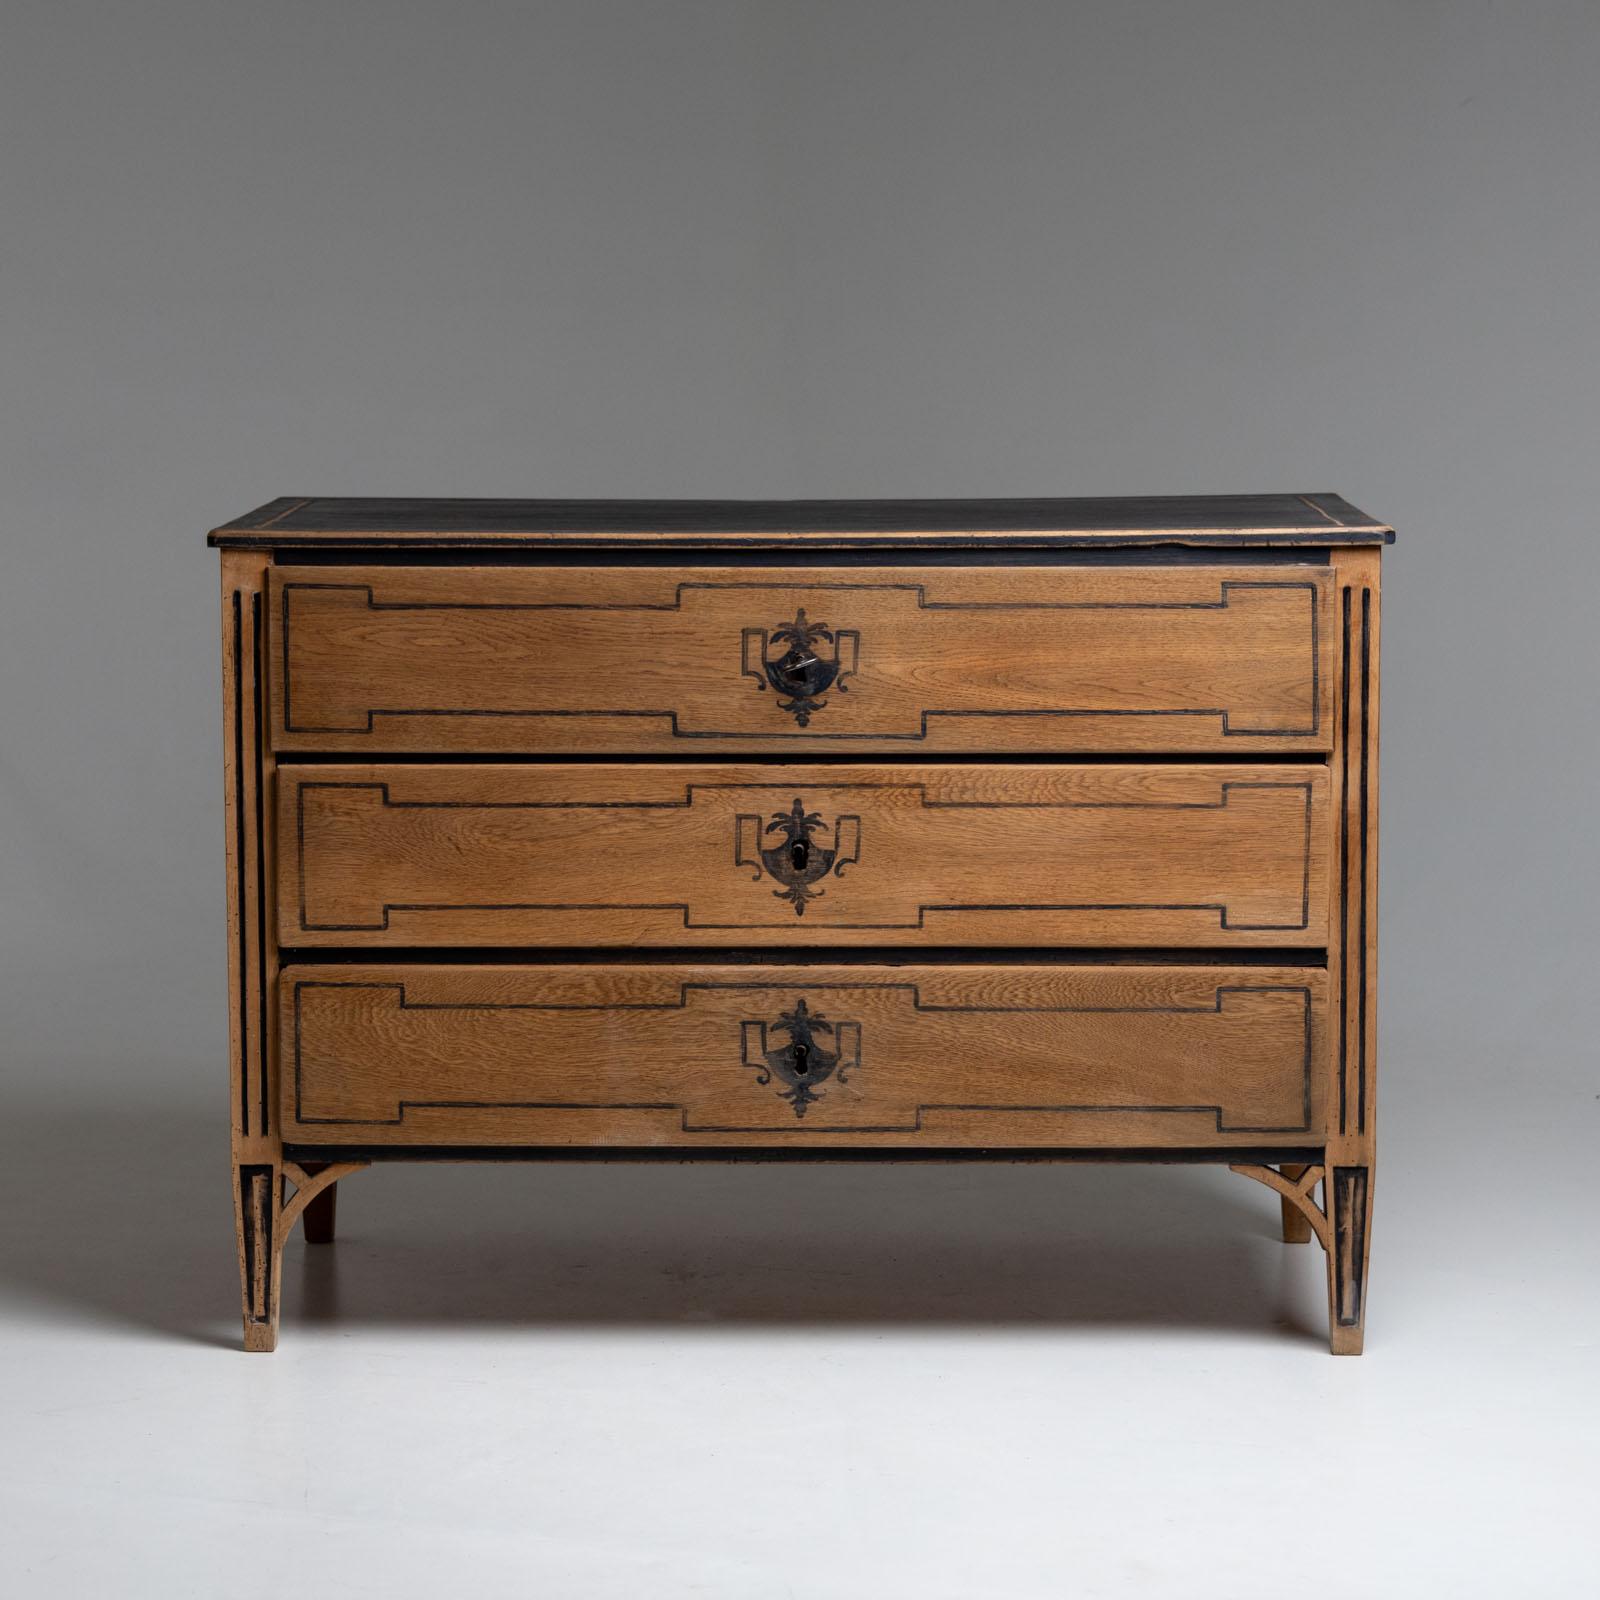 Large chest of drawers made of solid oak with black urn decoration and framing paintings on the front. The top panel is painted black and the carved fluting on the pilaster strips is also set off in dark. The chest of drawers has three drawers and